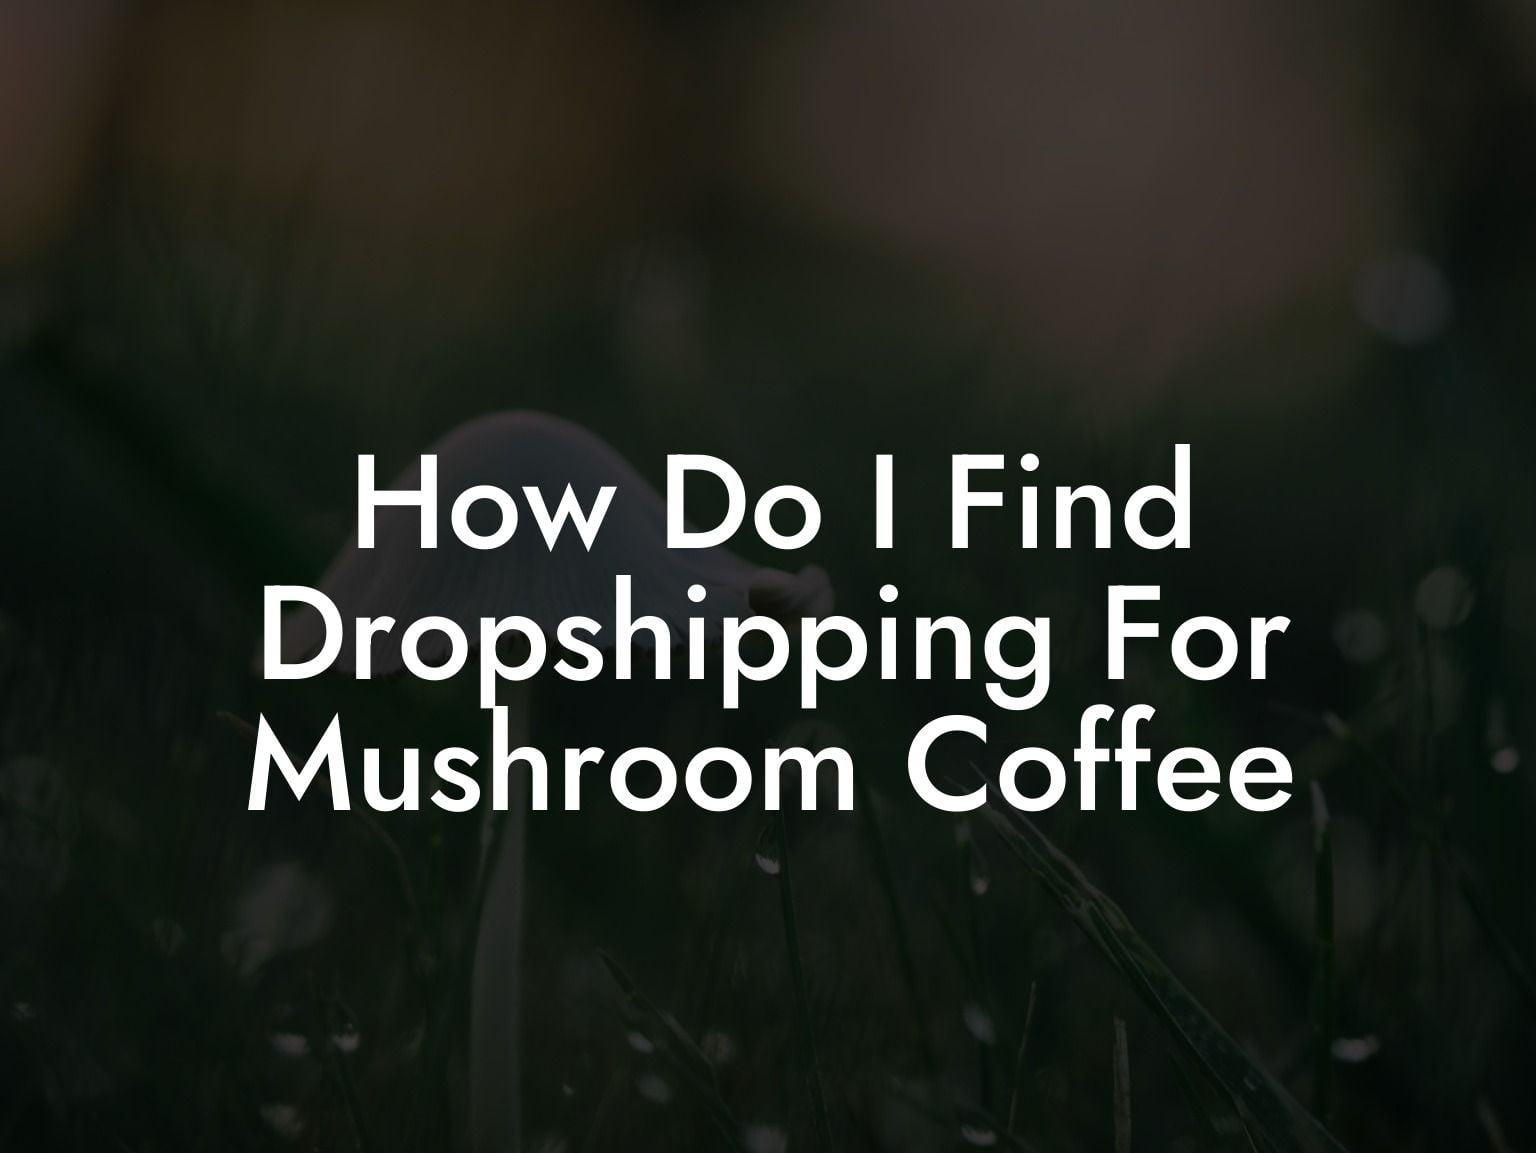 How Do I Find Dropshipping For Mushroom Coffee